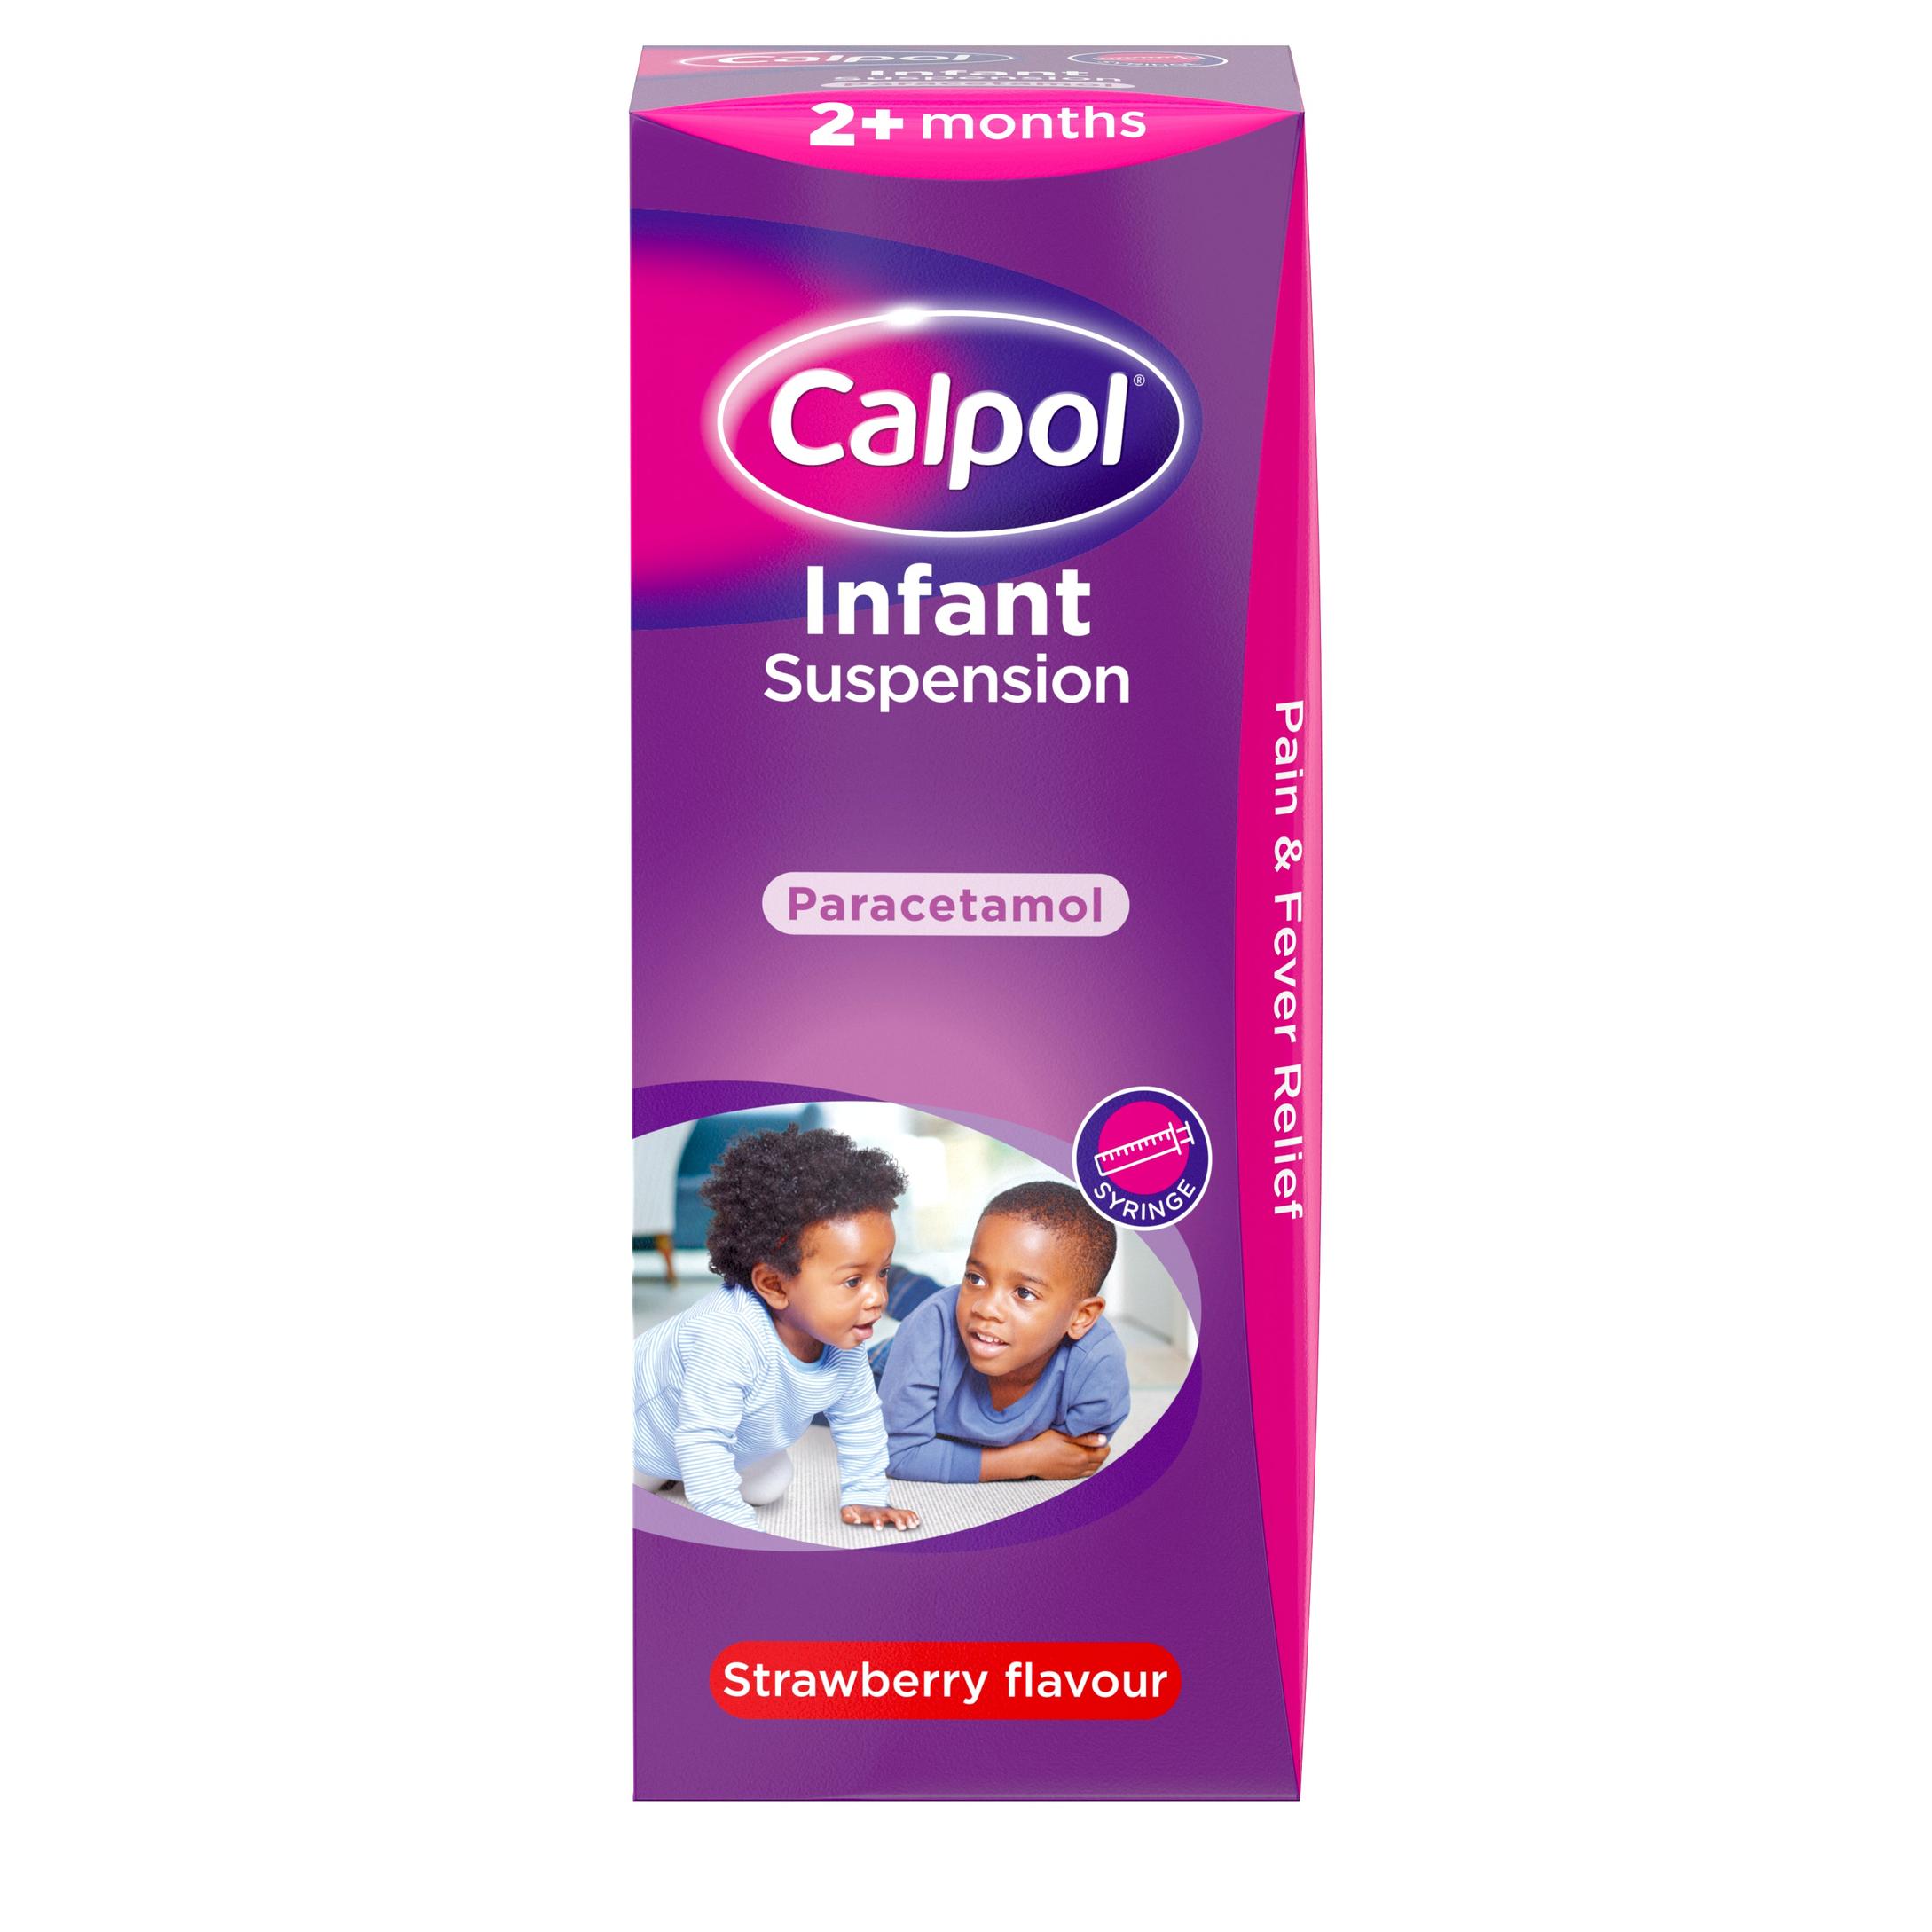 Calpol infant suspension offers at £749 in Lloyds Pharmacy